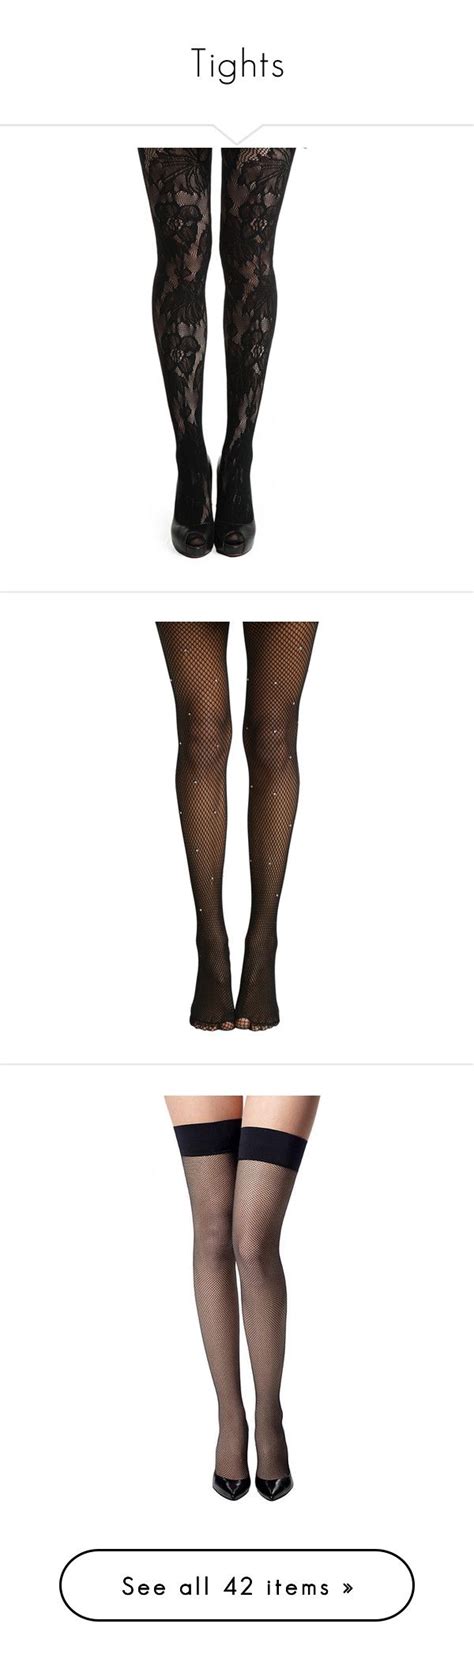 Tights By Lulucosby Liked On Polyvore Featuring Intimates Hosiery Tights Leggings Bottoms